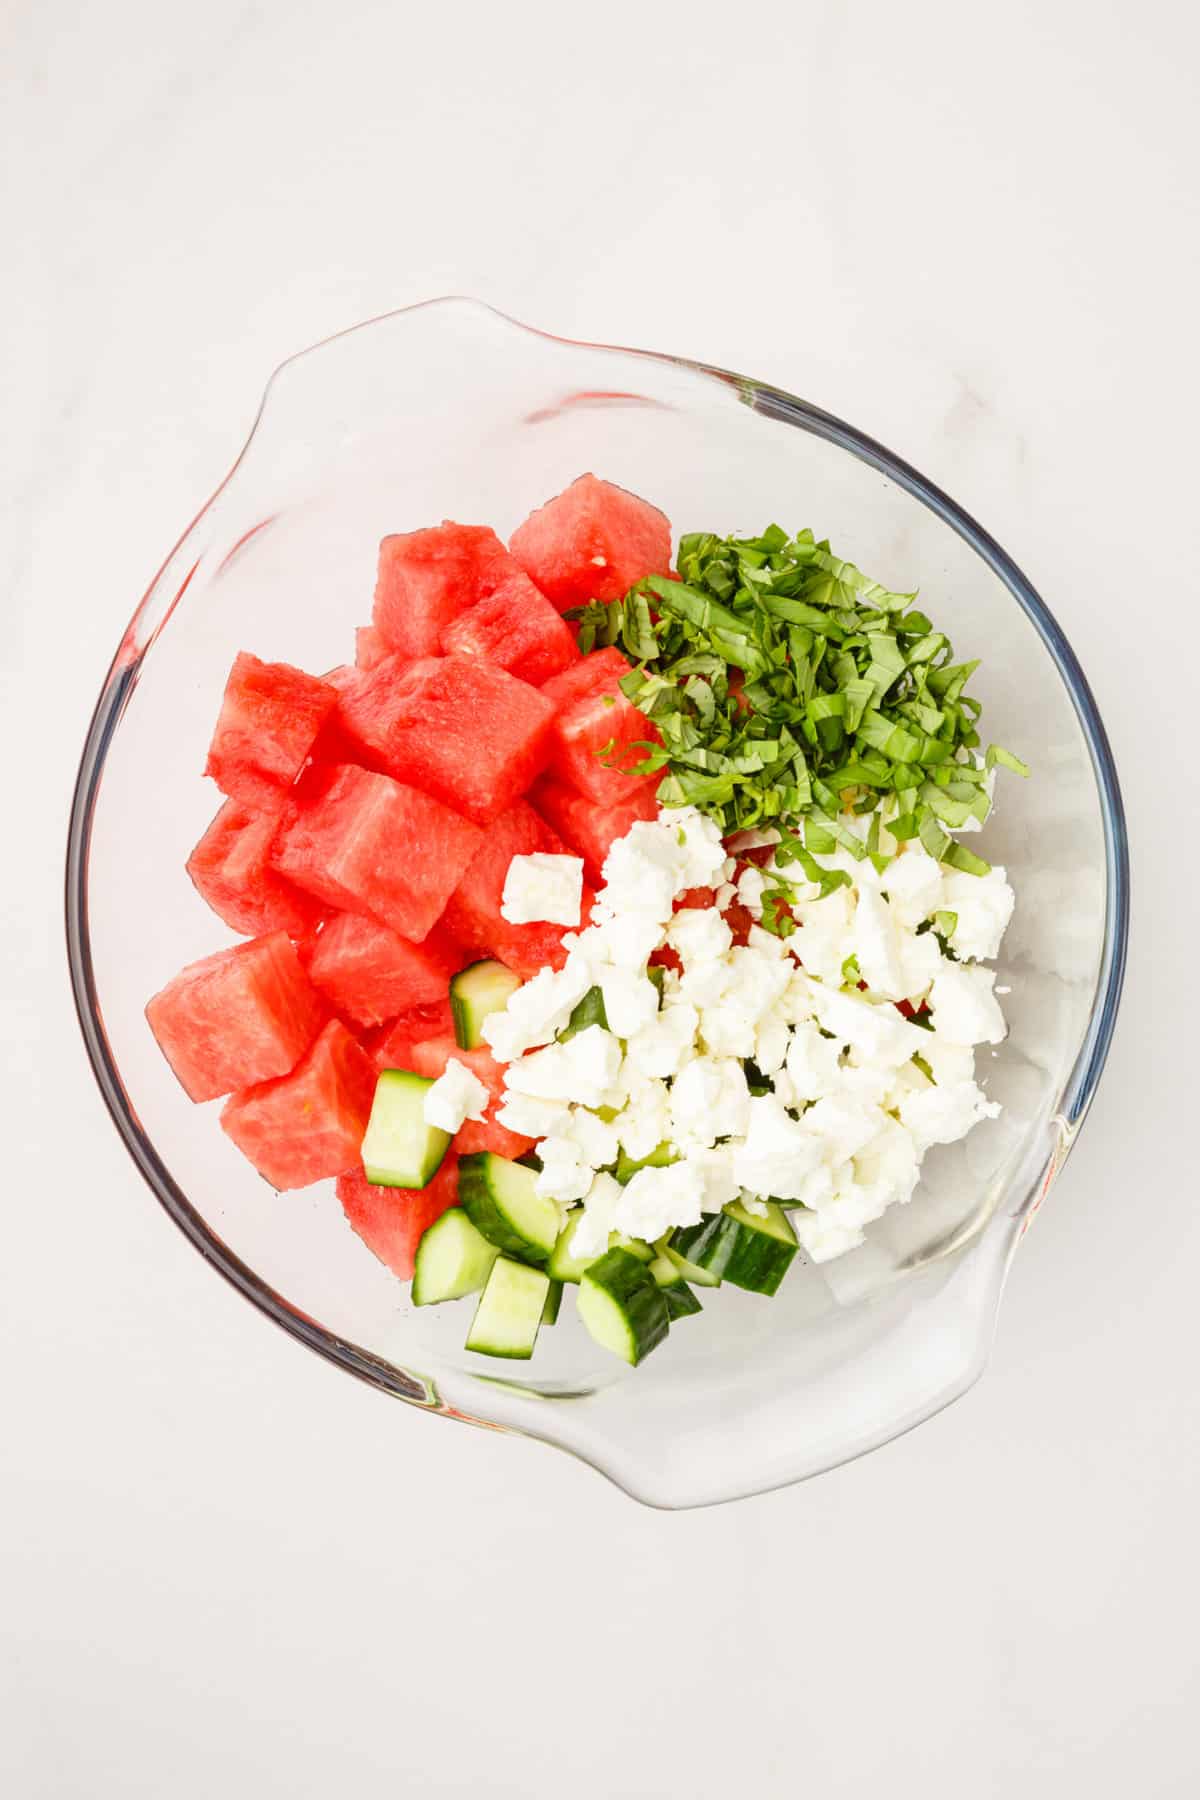 cubed watermelon, cut mint, cucumbers and feta cheese unmixed in a large glass bowl